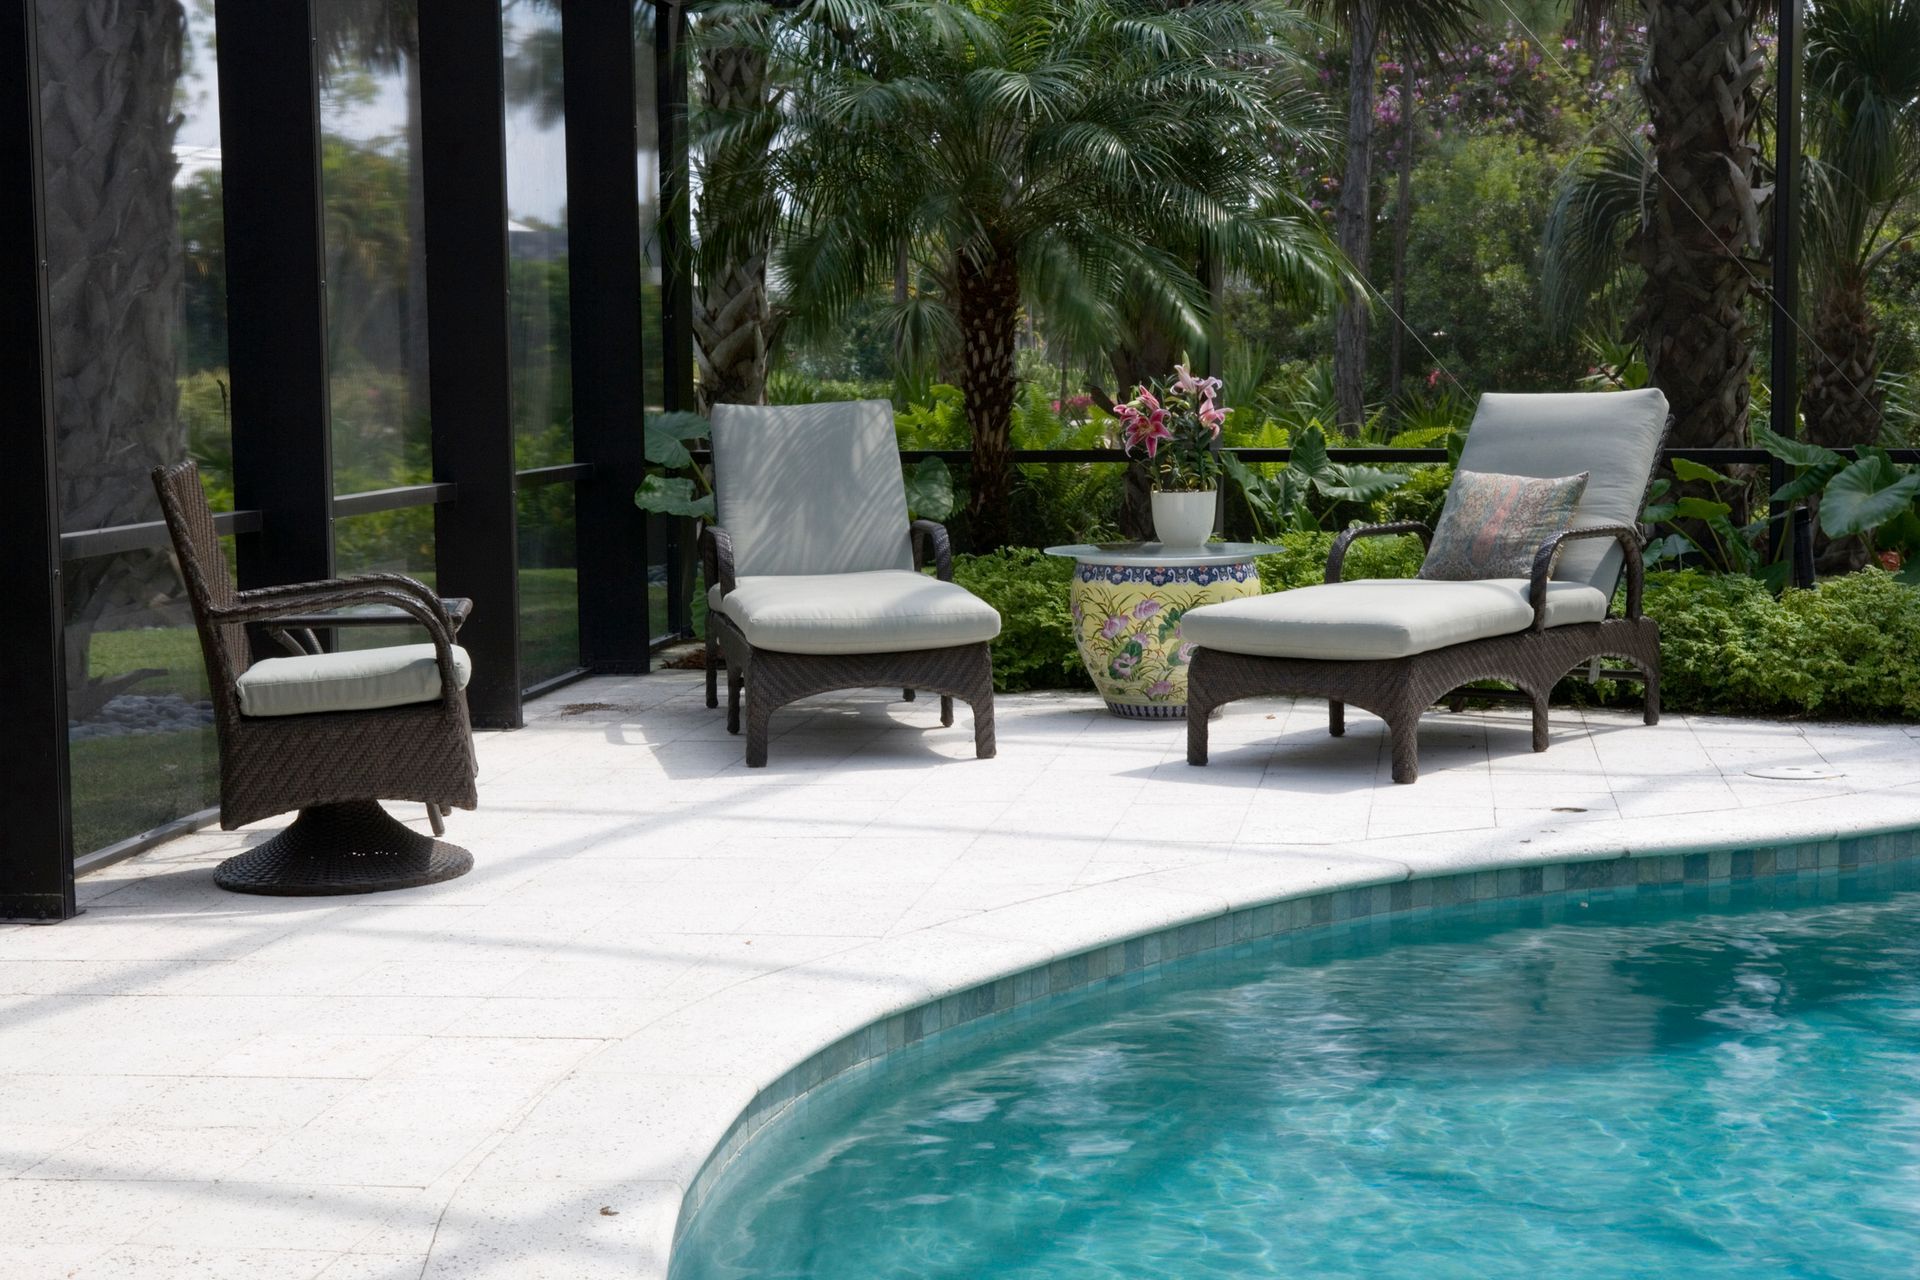 A Patio with Chairs and A Table Next to A Swimming Pool - Mingo, IA - Karns Concrete LLC